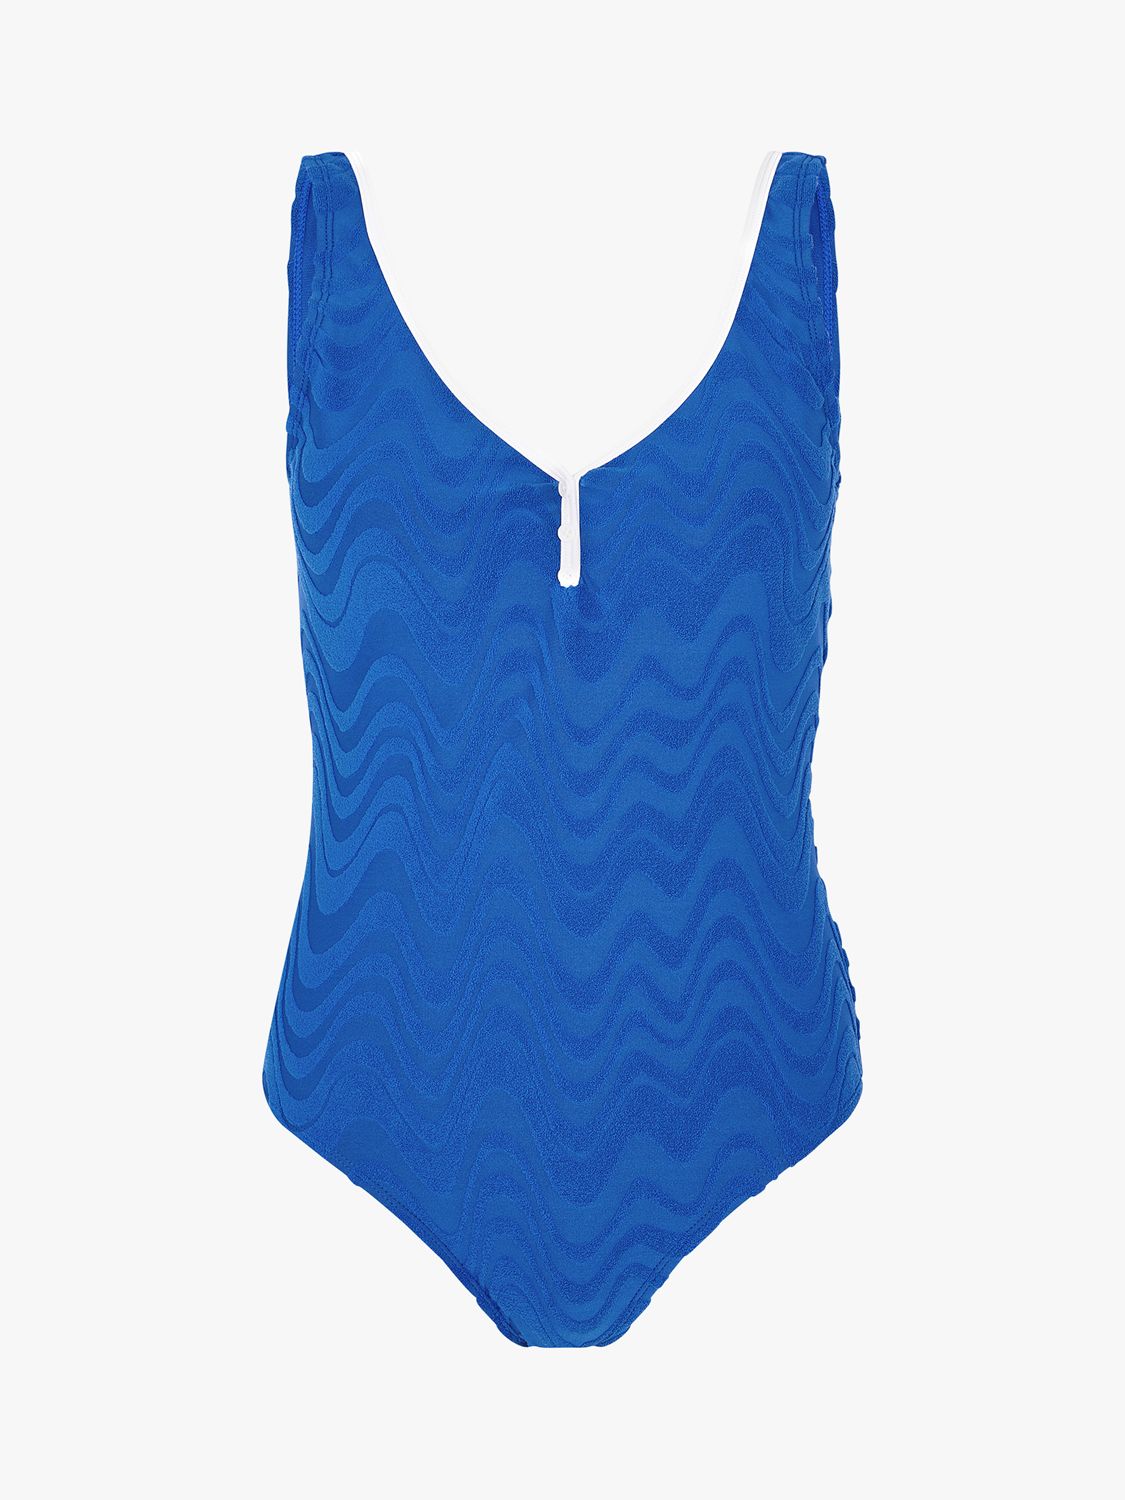 Buy Accessorize Textured Swimsuit, Blue/White Online at johnlewis.com